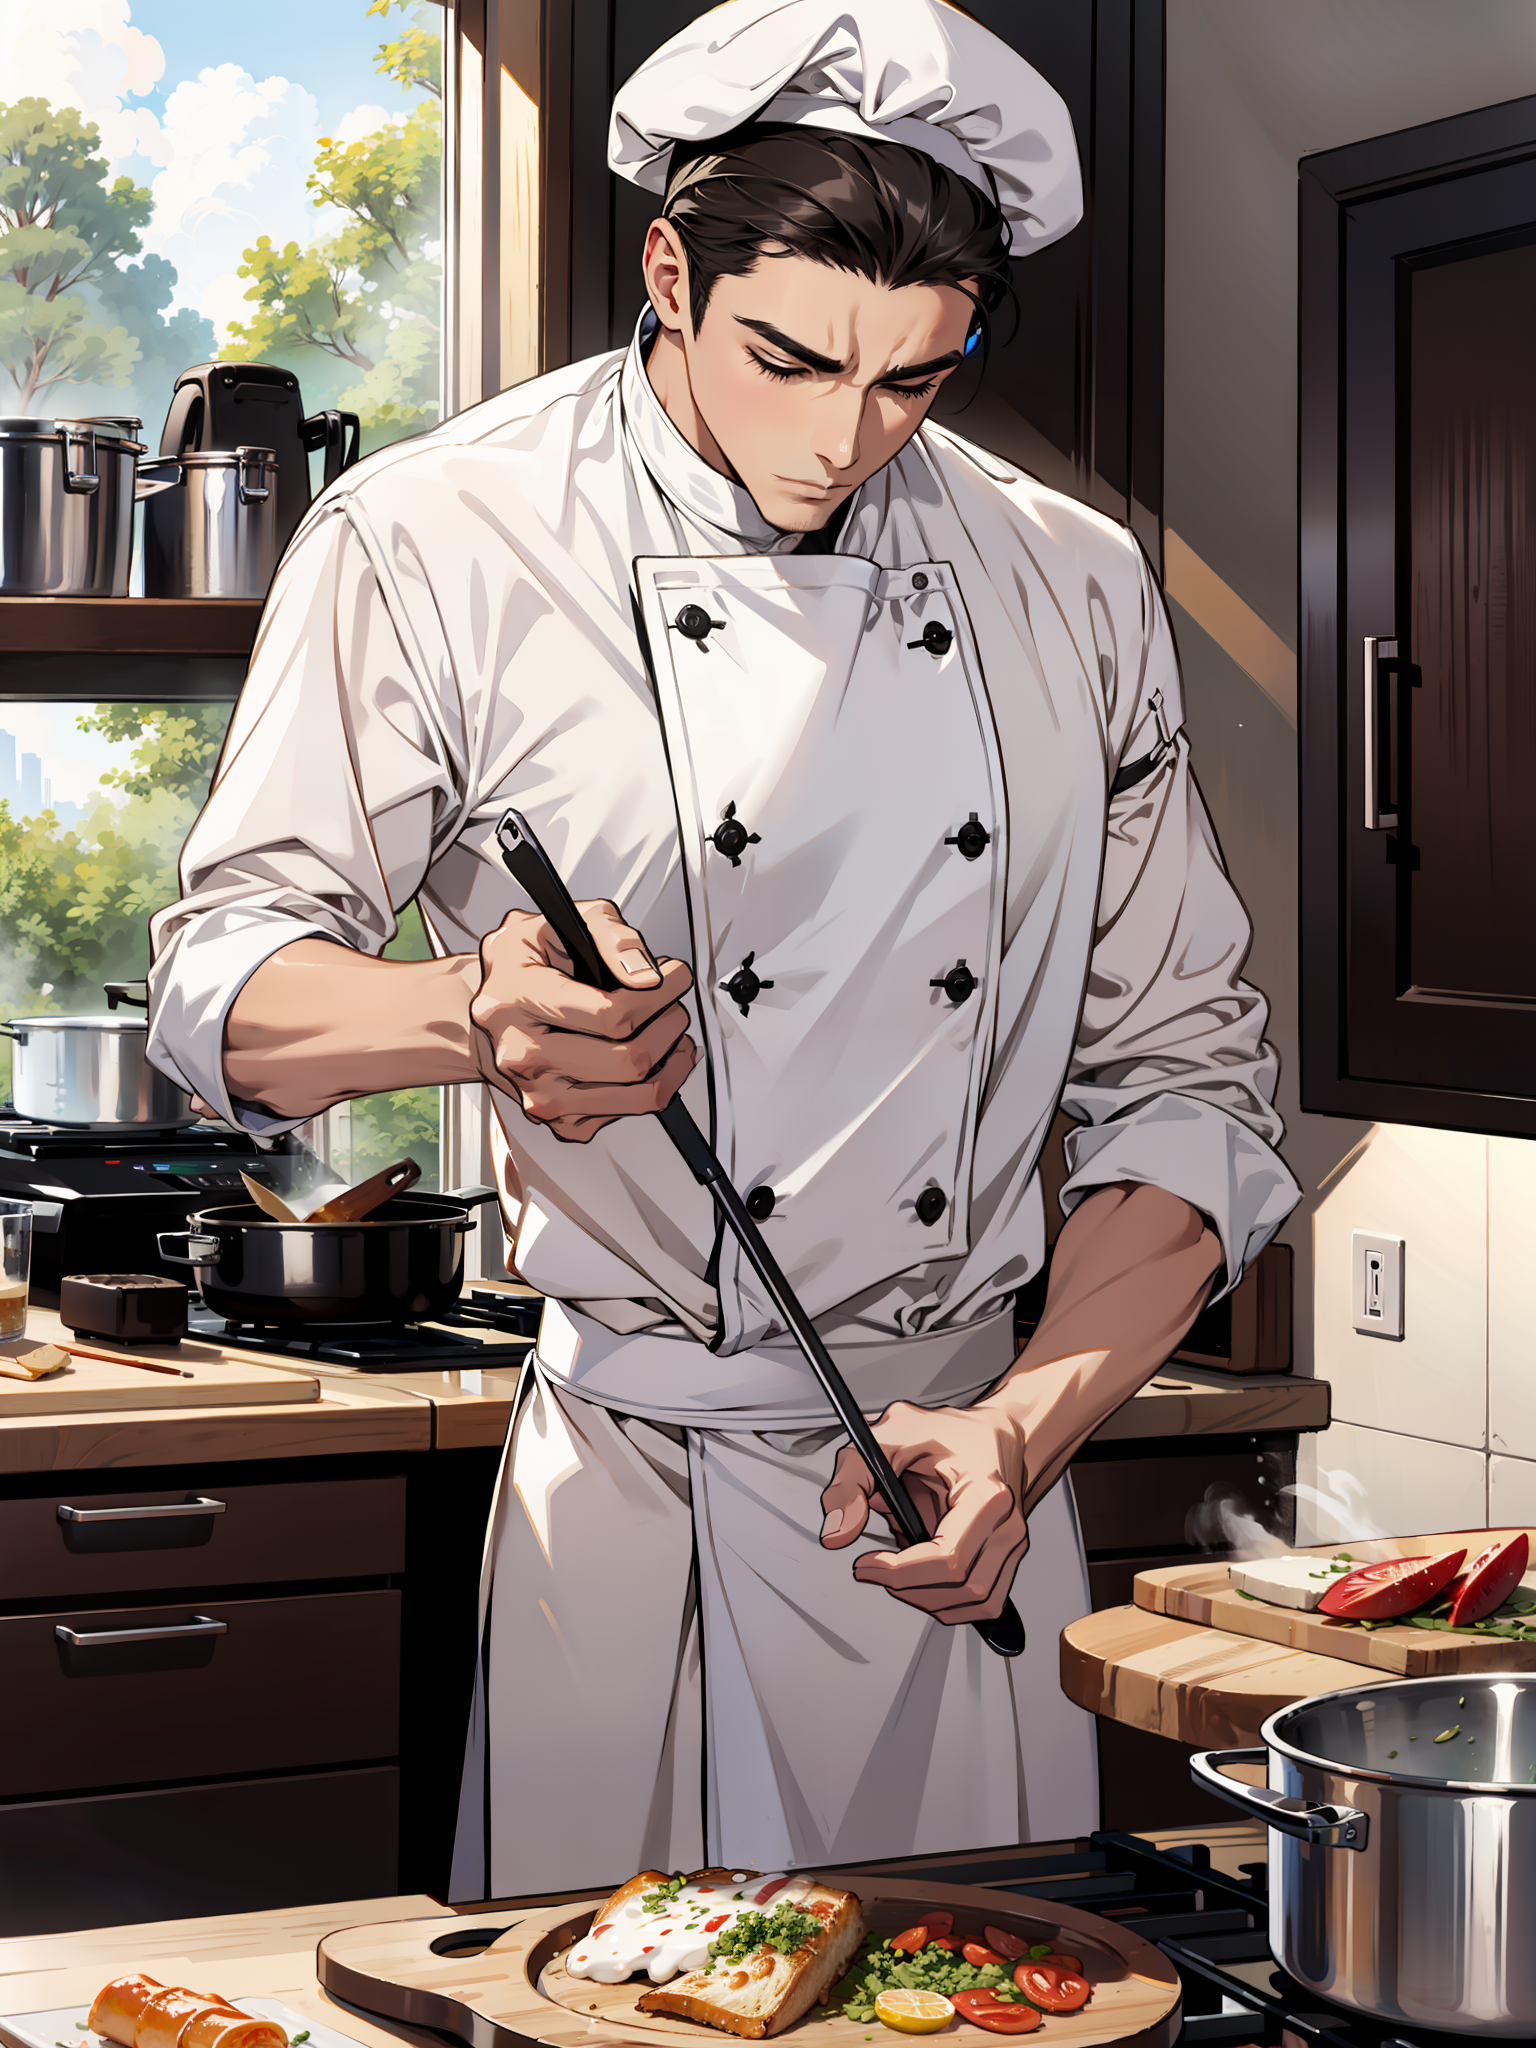 Male,OC,Roleplay,He’s your families personal chef, but he hates all of you since he doesn’t get paid well.